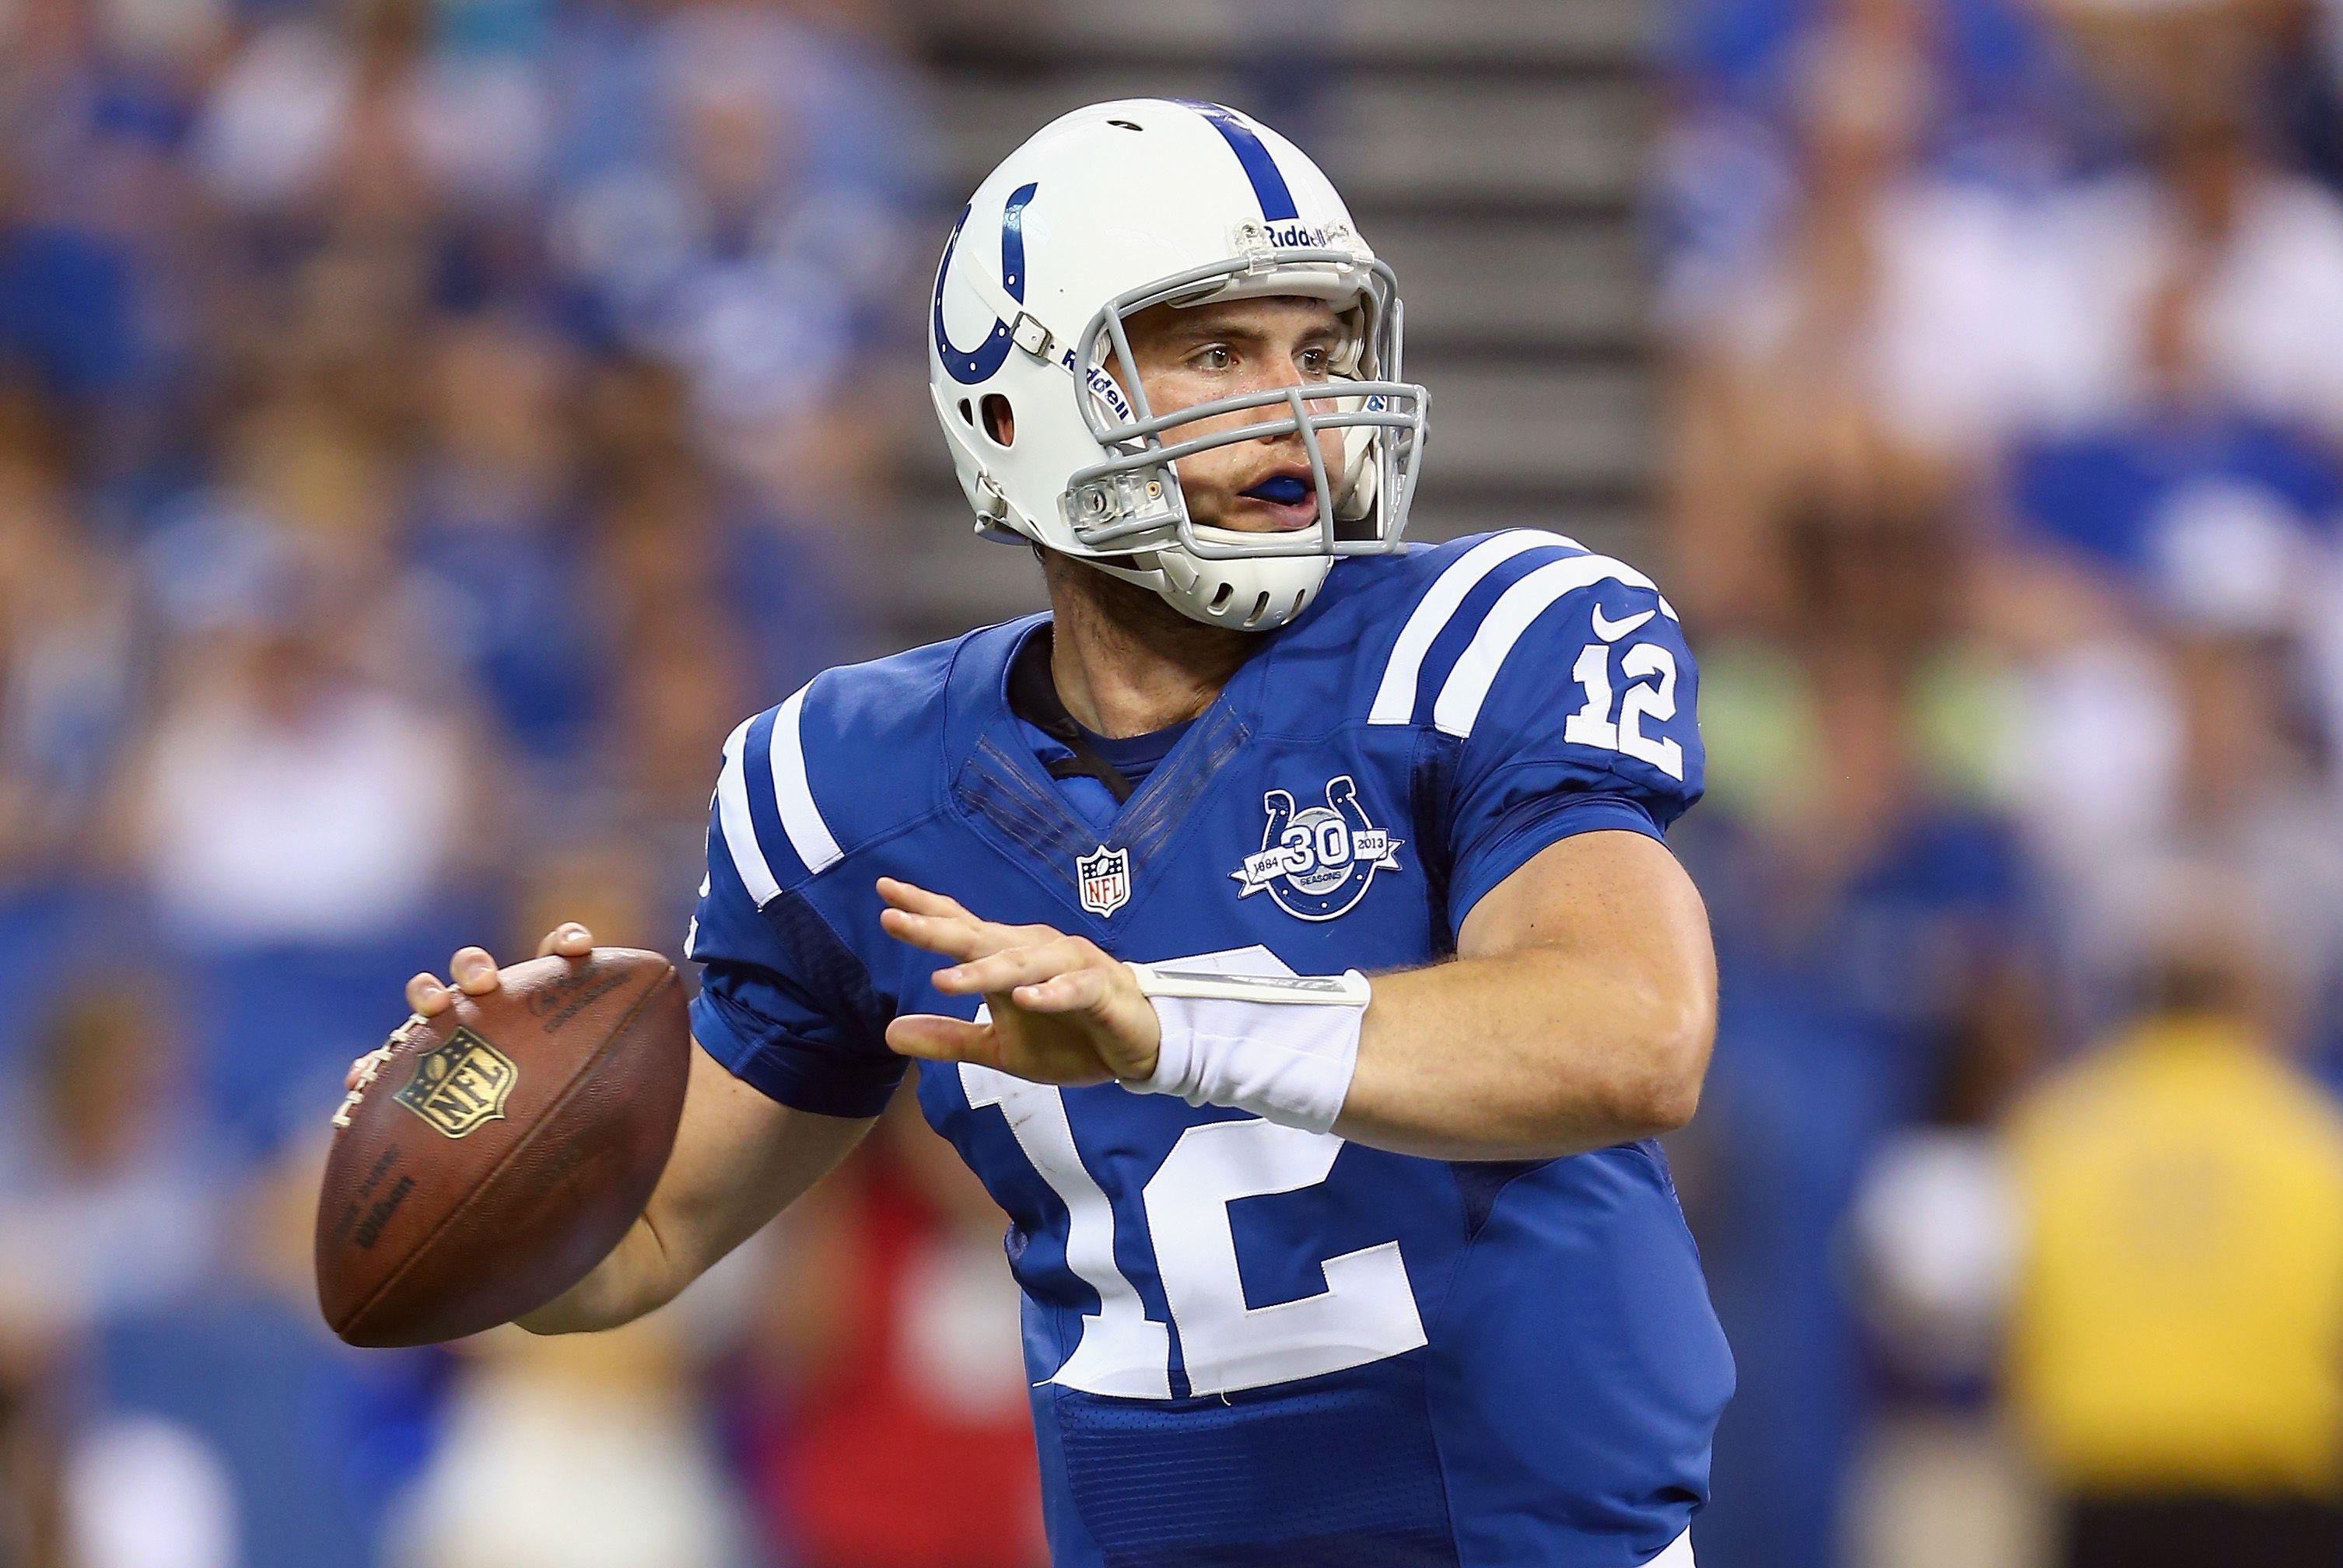 Indianapolis Colts HD Wallpaper with Andrew Luck&;s Photo. HD